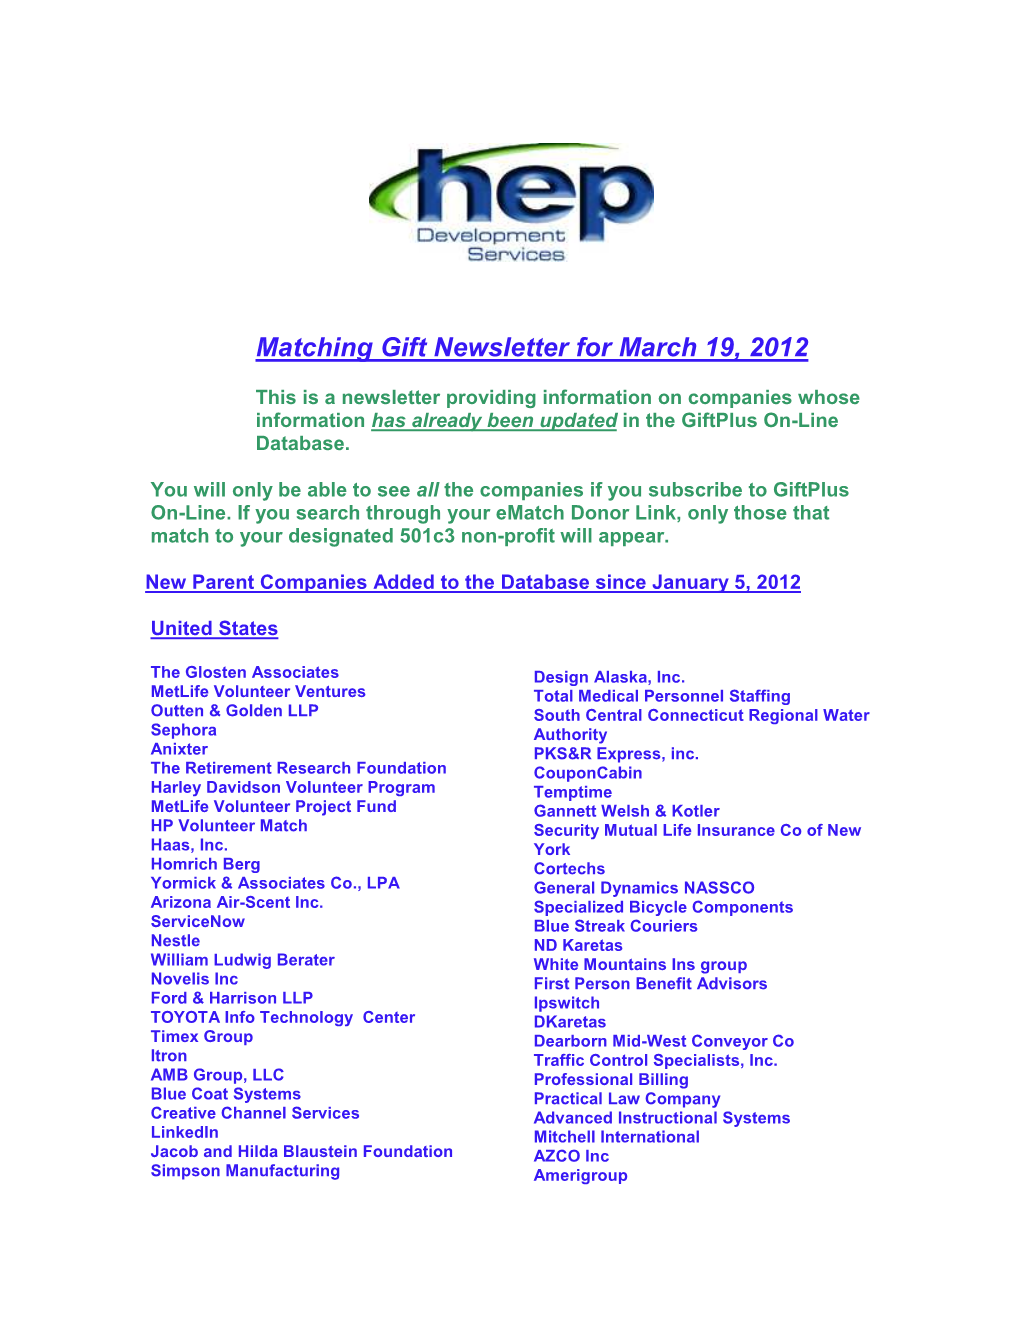 Matching Gift Newsletter for March 19 2012 (2) Revised 4.13.12